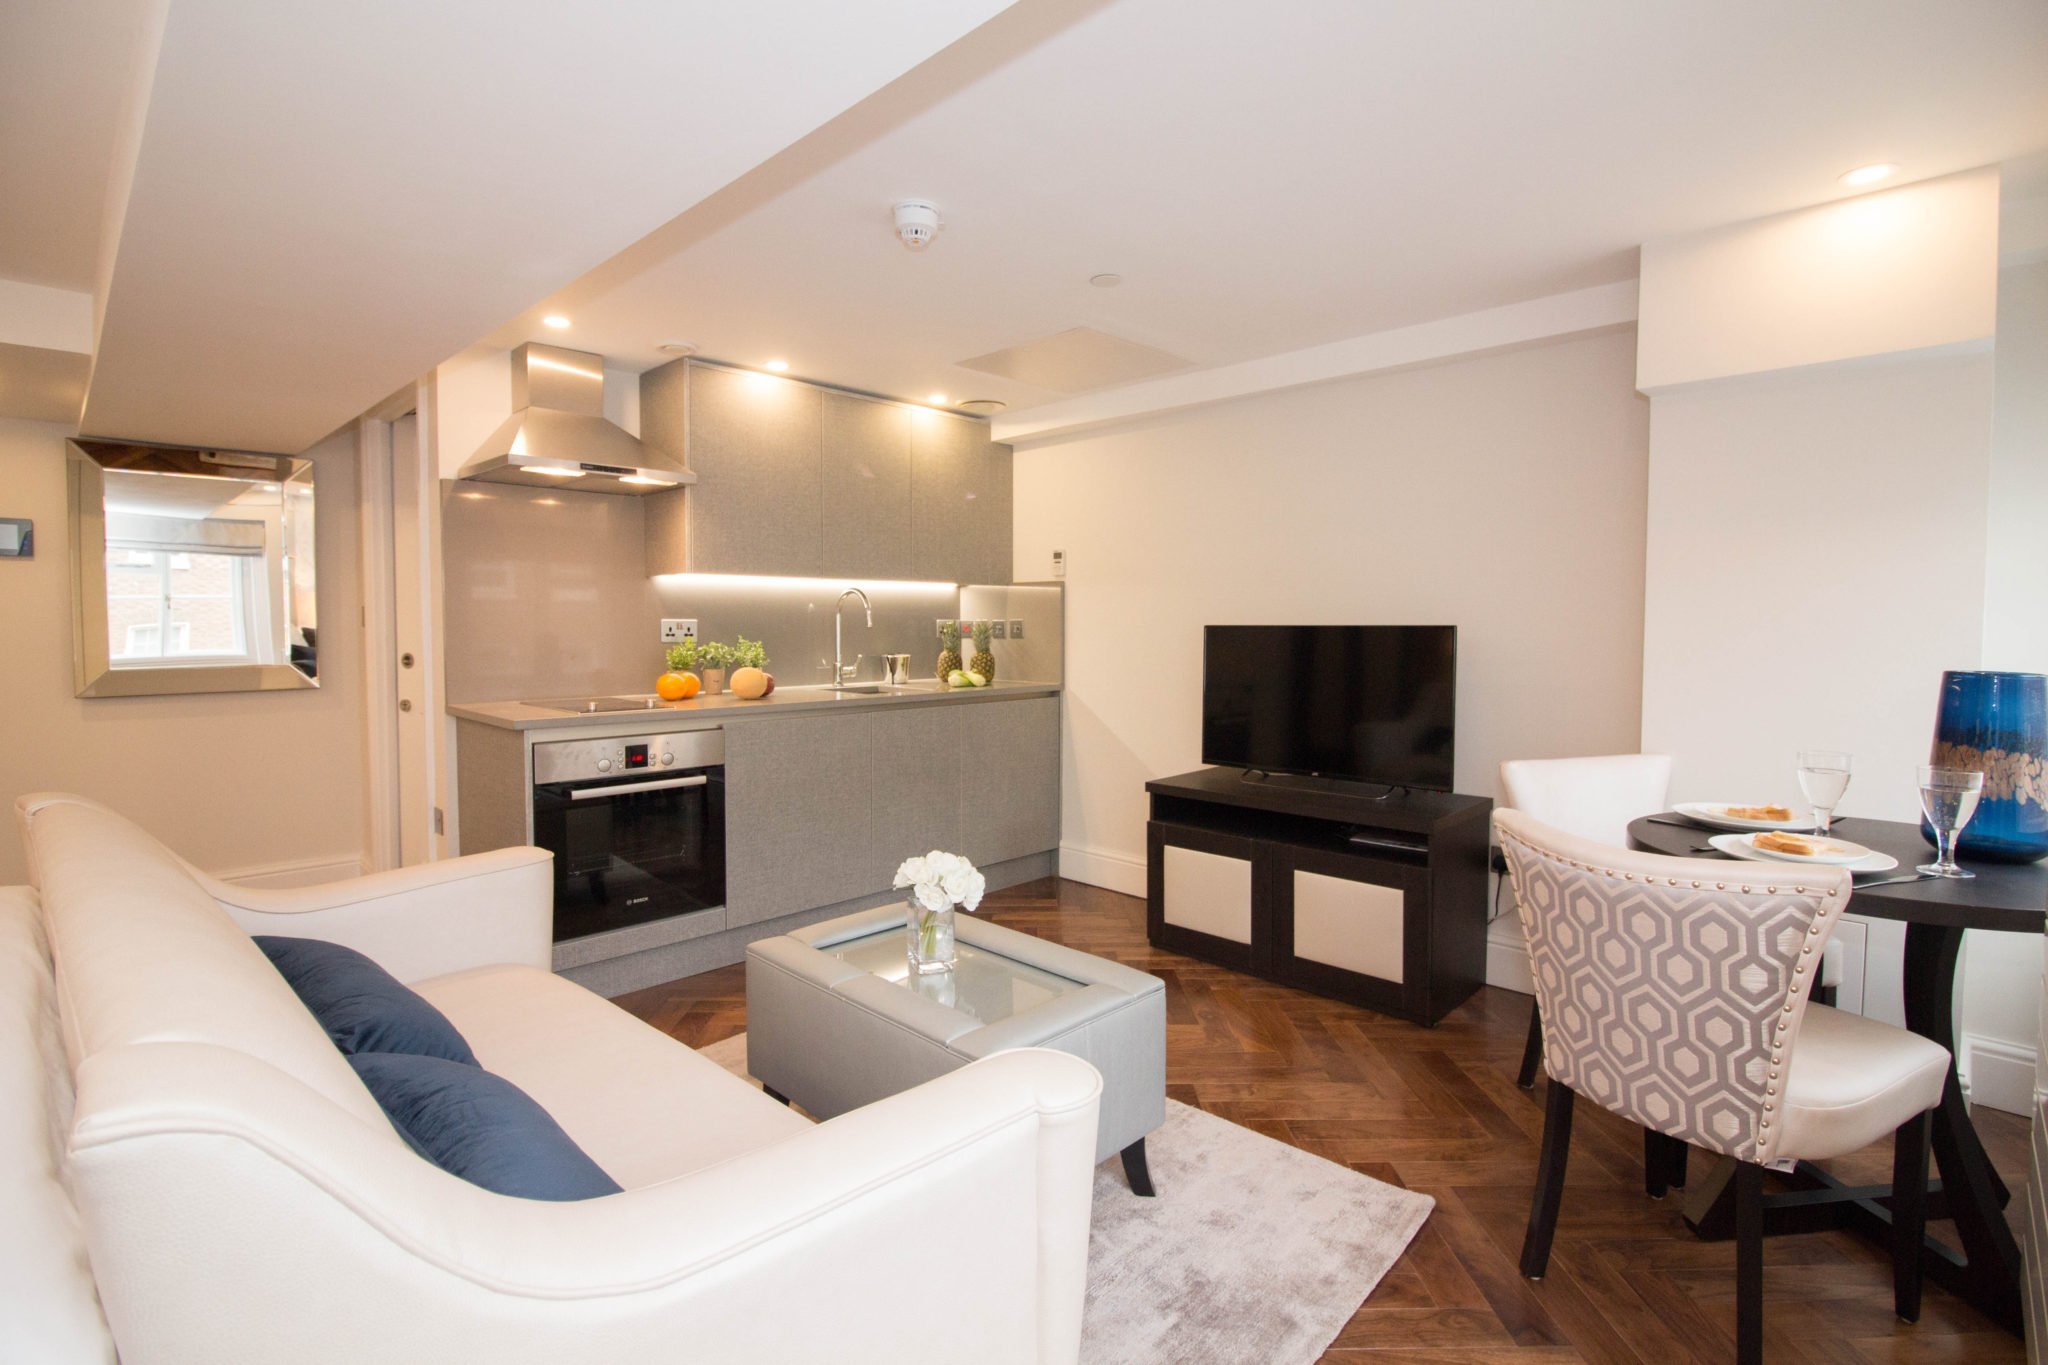 Baker-Street-Serviced-Apartments---Luxury-Self-Catering-Accommodation-Central-London-|-Urban-Stay